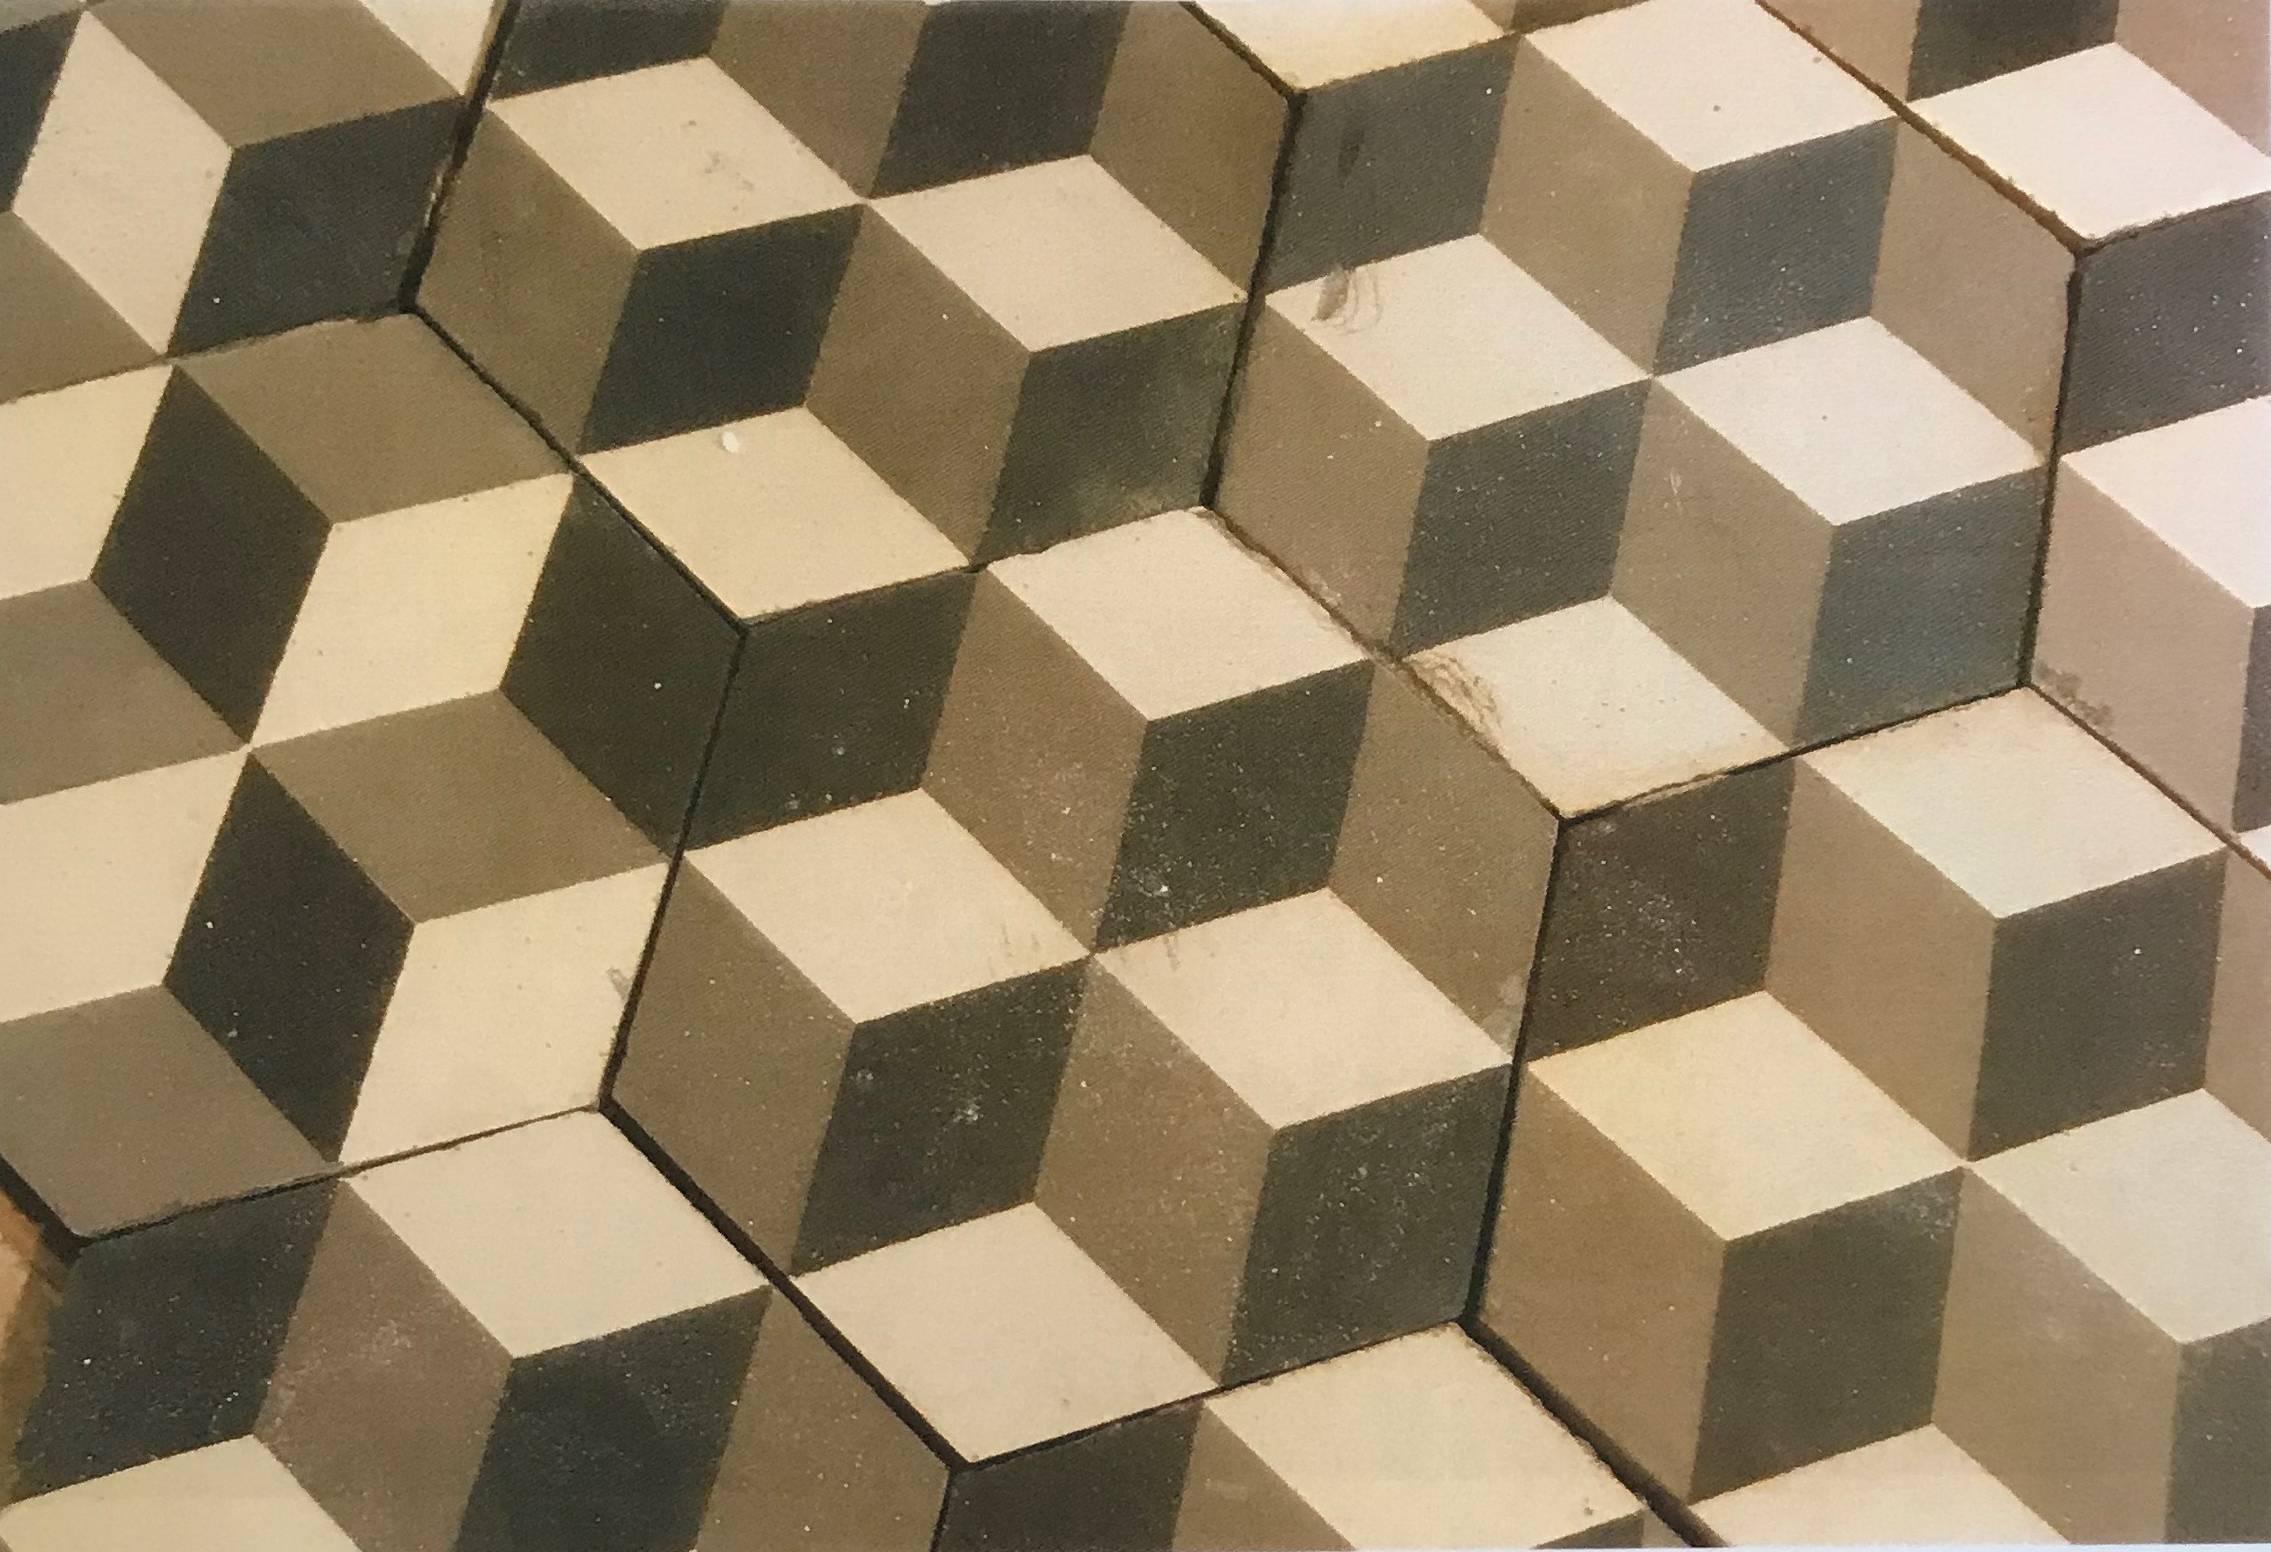 Dating back to early 1900 these geometric French tiles offer a dazzling three-dimensional illusion. Unlike the square replica's', these hexagon tiles allow for your eye to focus on different color patterns rather than a grout lines. With 110 square